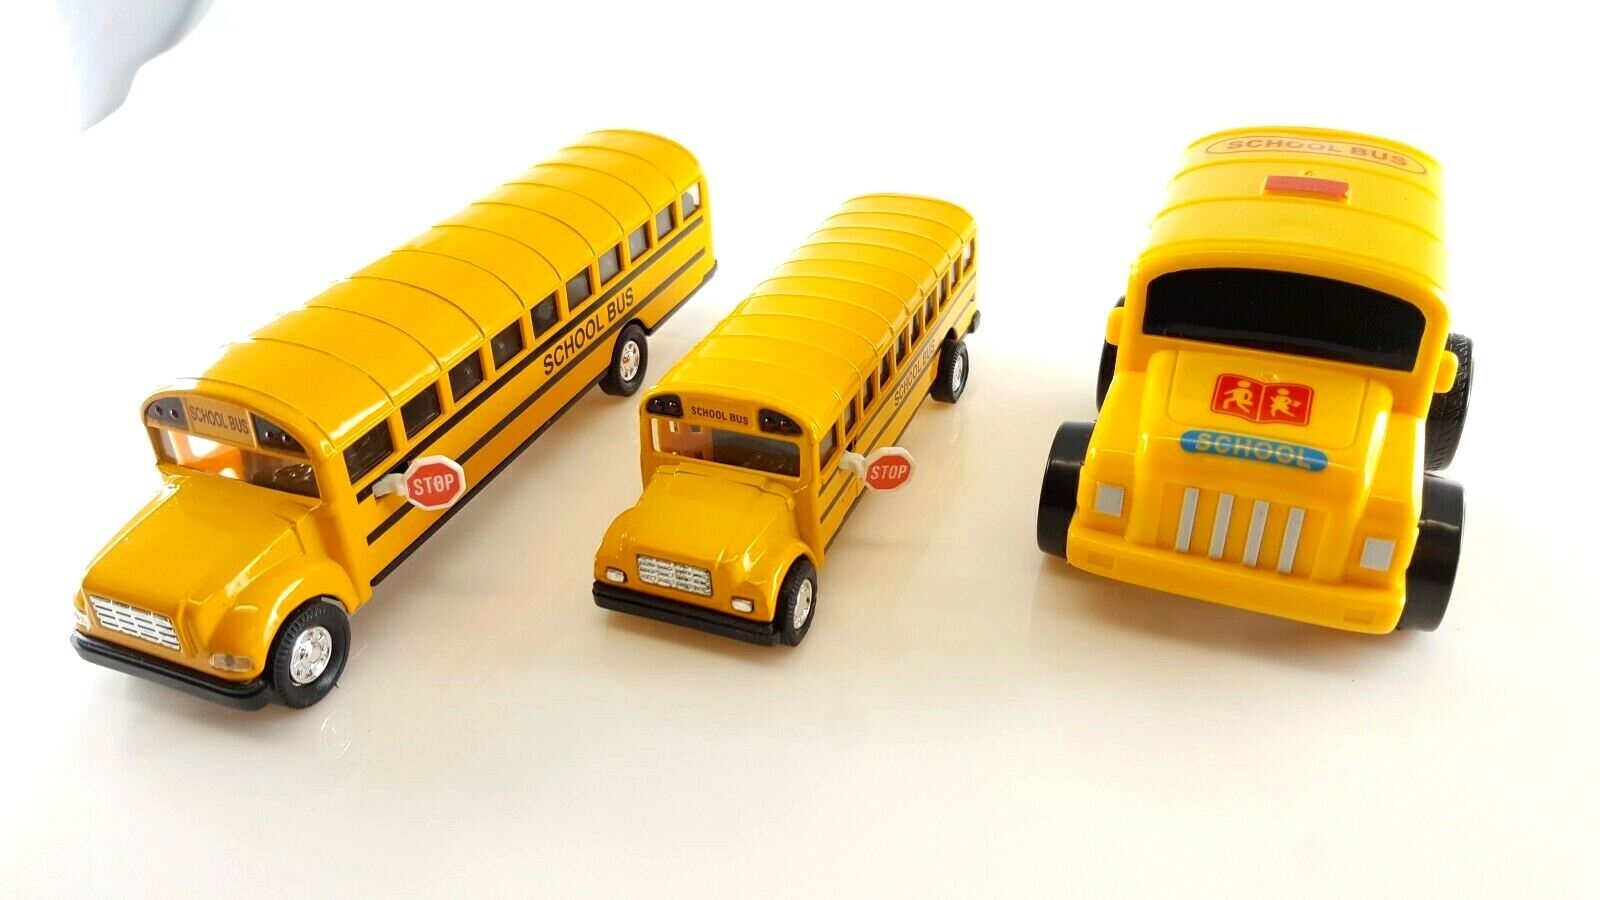 School Bus 3pcs Boy Gift Toy (7 inch, 5 inch, & 360 degrees spinning)